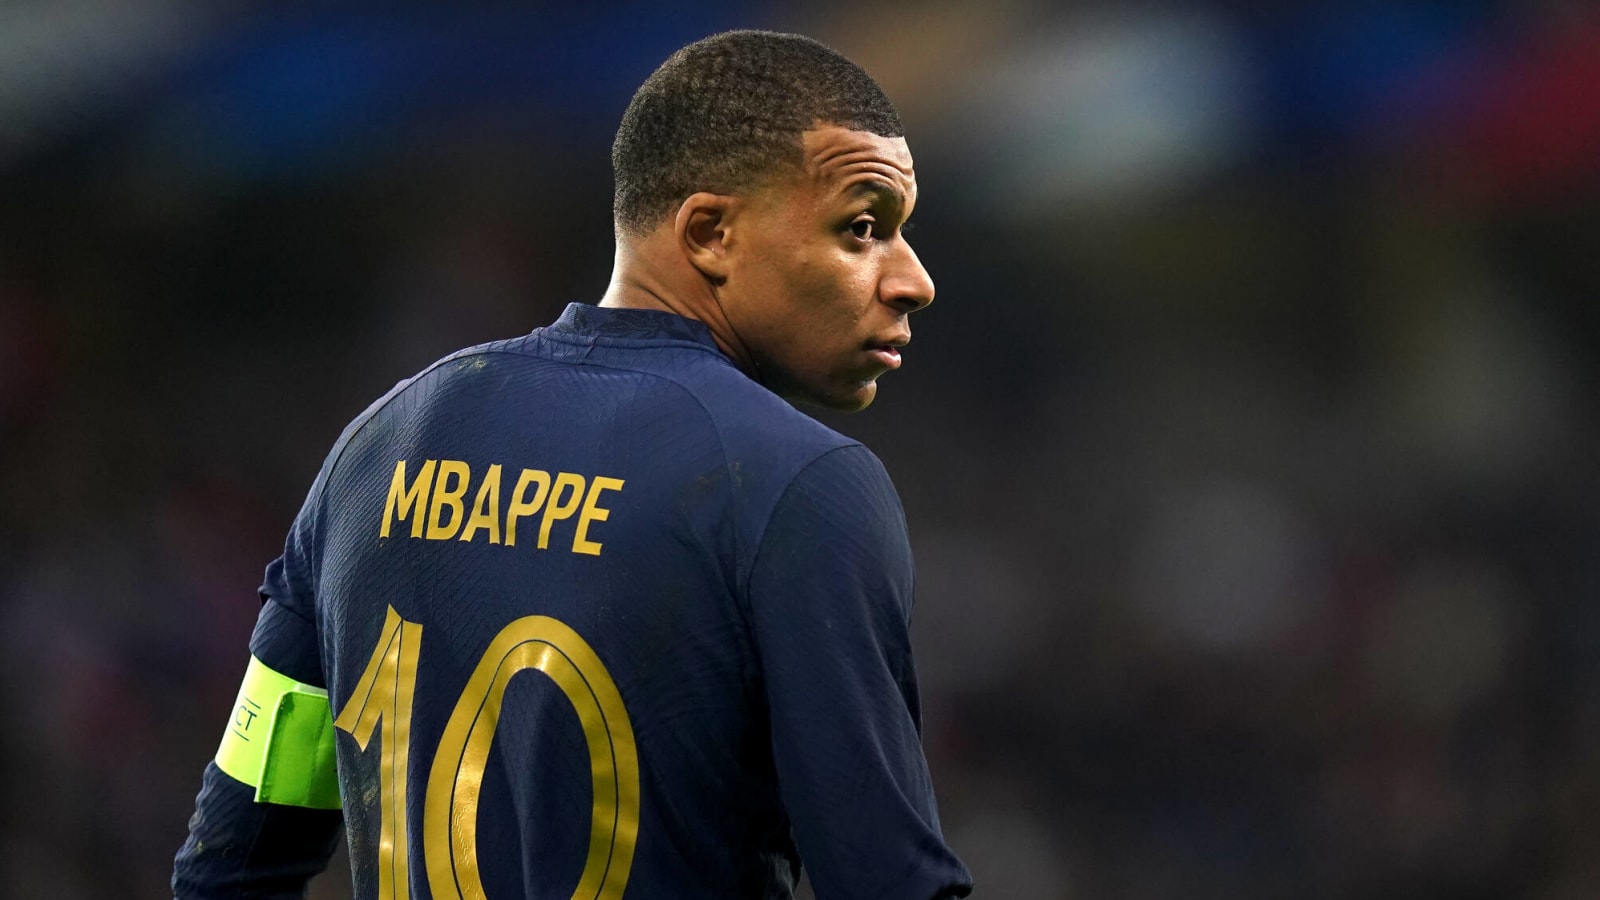 Inside the deal for Mbappe to leave PSG for Real Madrid